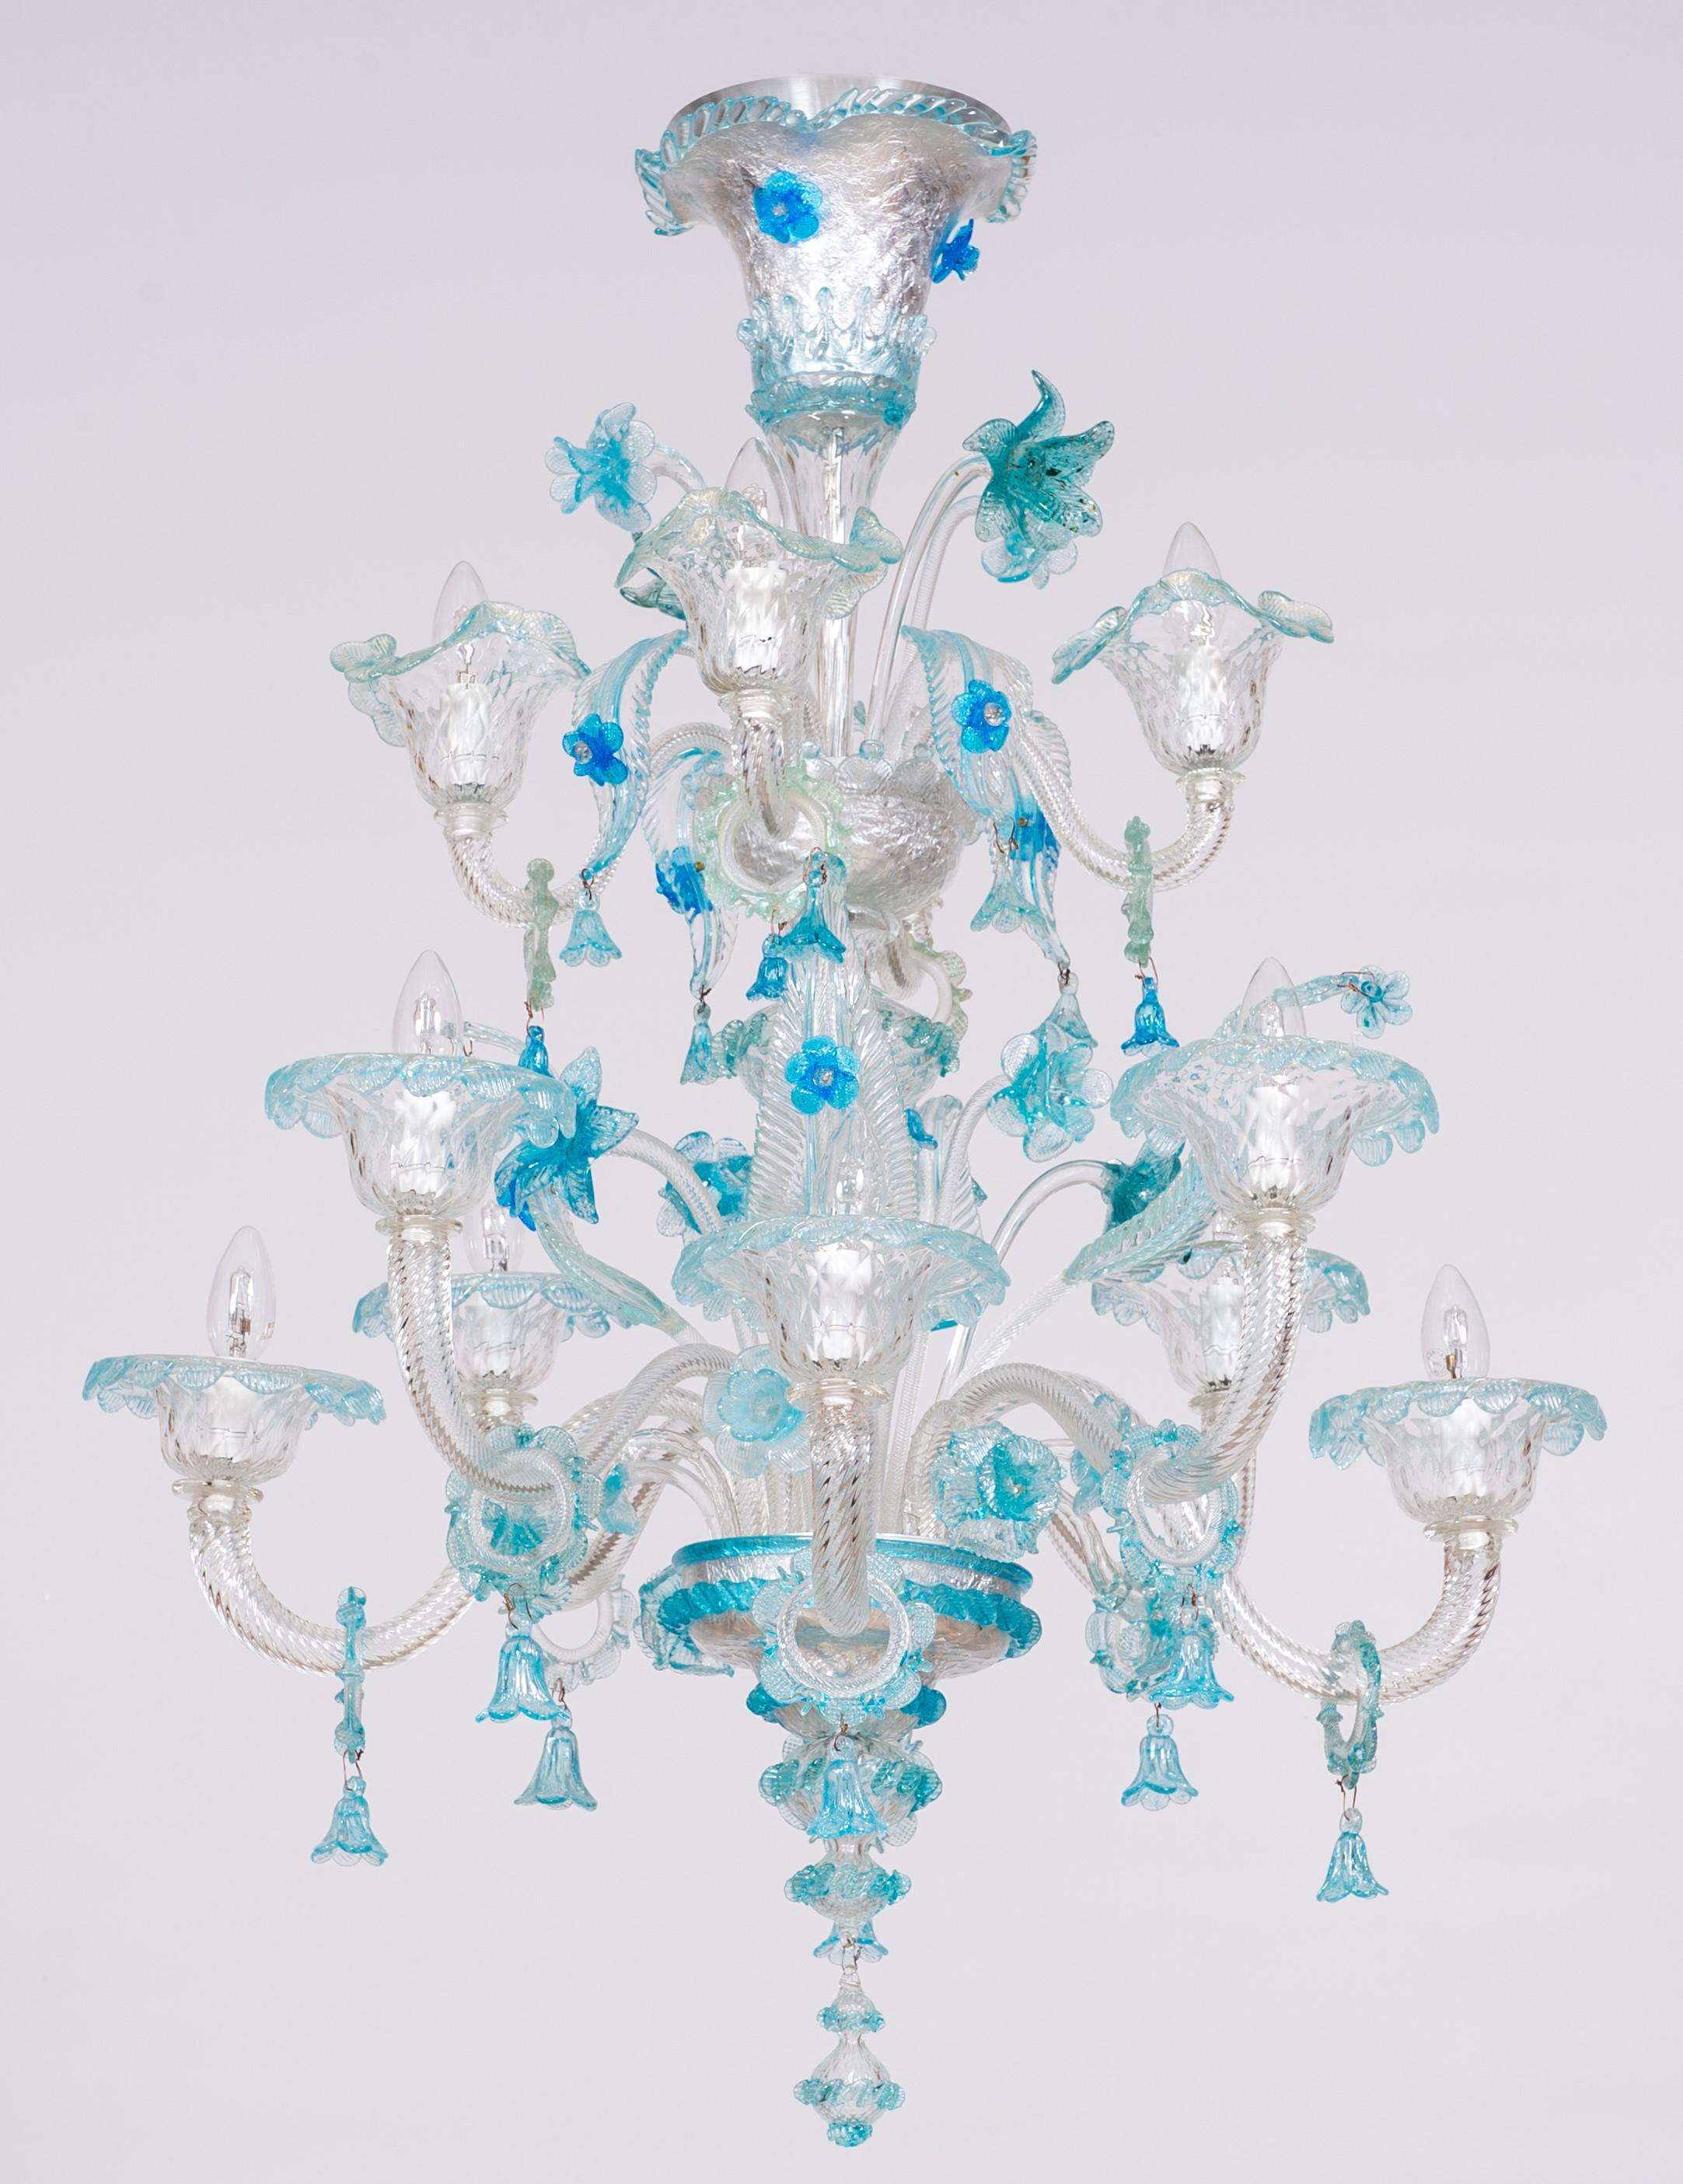 Double Tiered Murano Glass Chandelier with vivid Blue Floral Patterns 1990s Italy.
A Majestic Double-Tiered Murano Glass Chandelier with Exquisite Blue Floral Design
This exquisite chandelier embodies the rich heritage of Murano glass artistry,